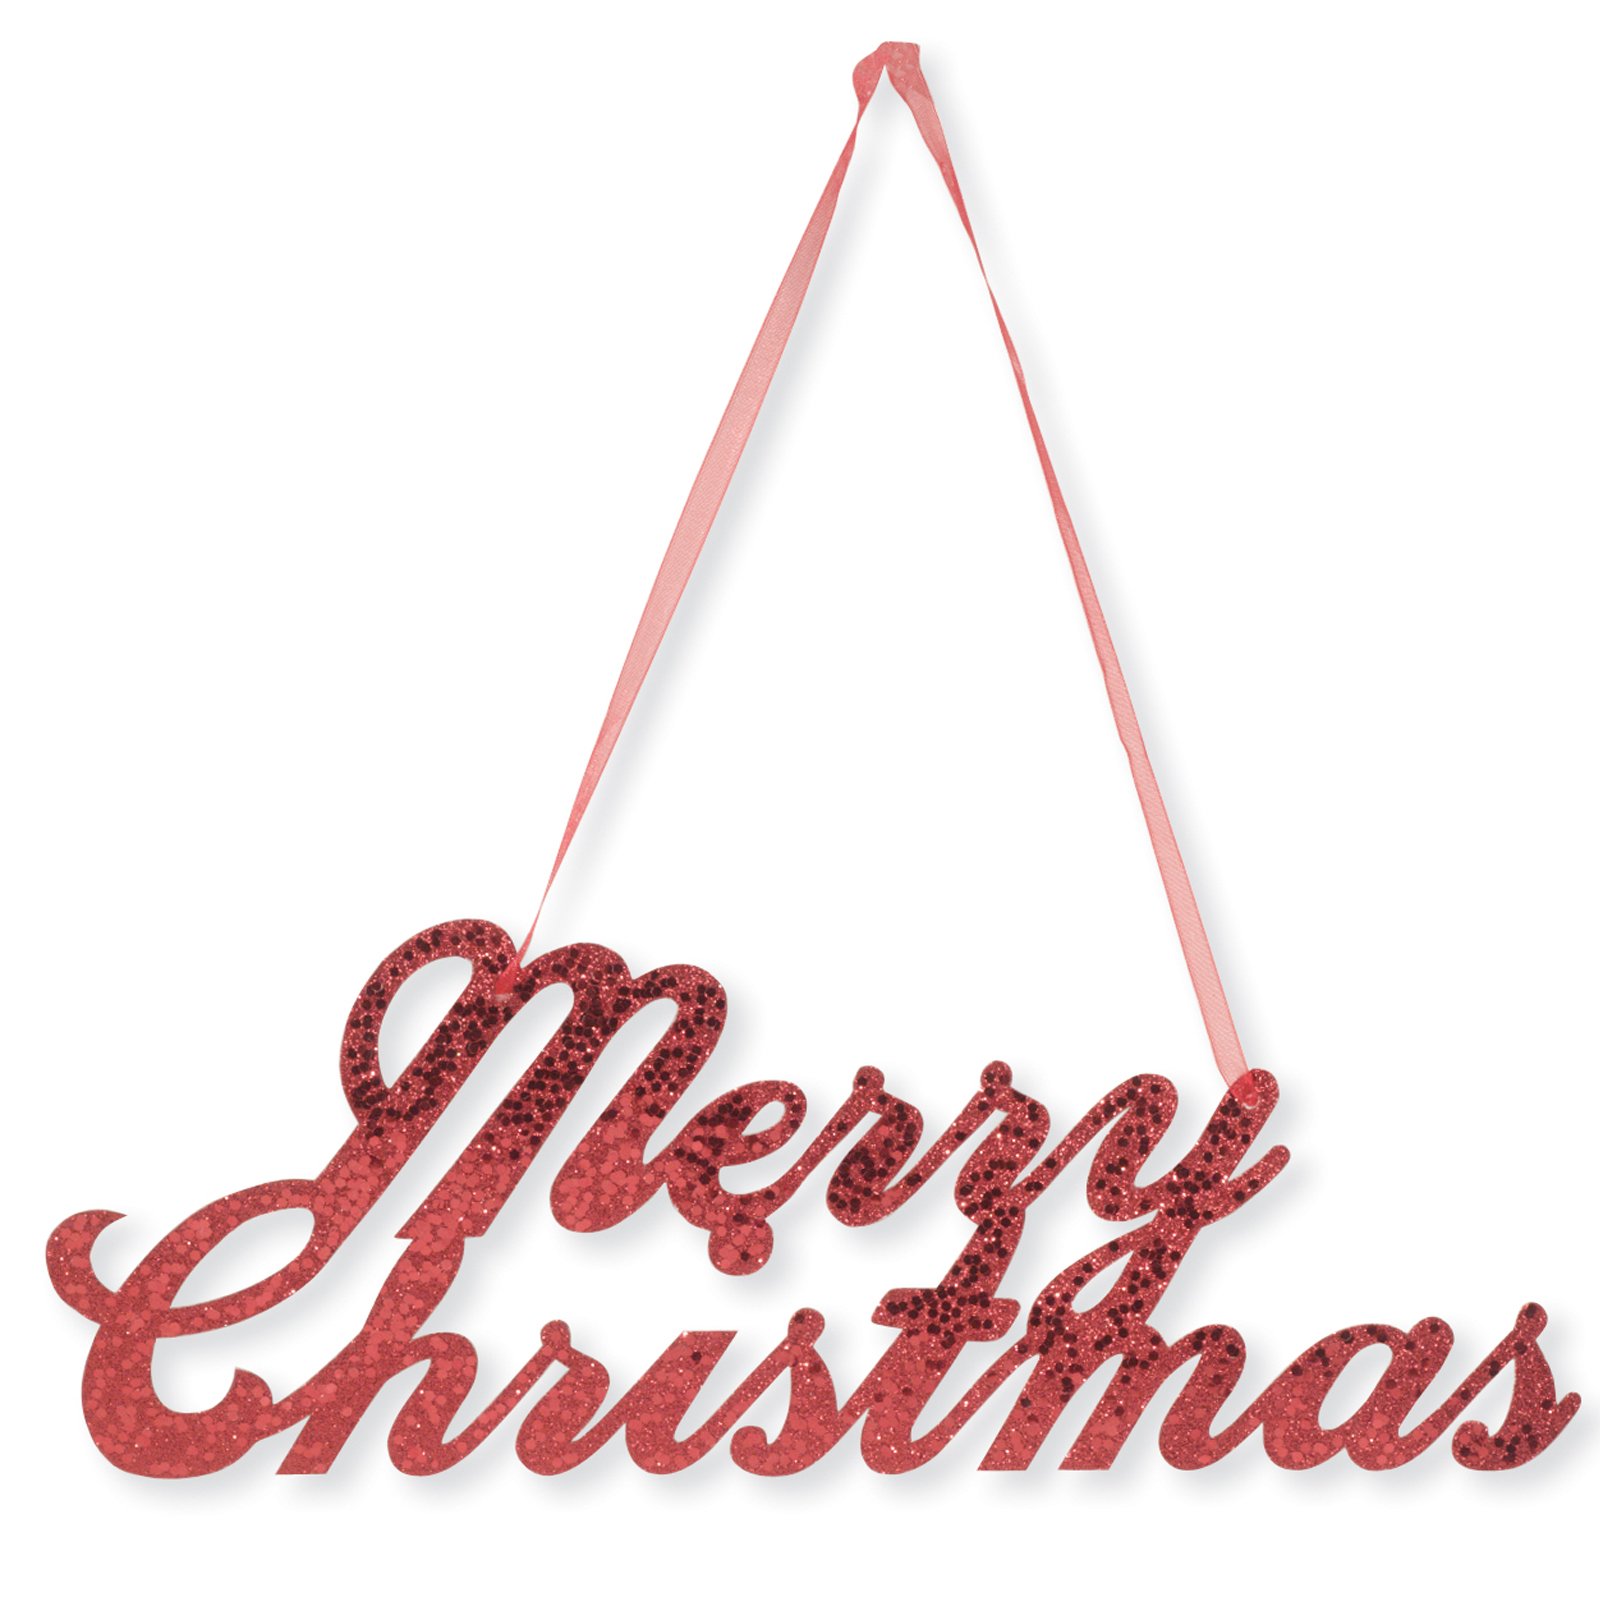 $1.58 Merry Christmas Glitter Sign with Ribbon Hanger at CostumesHut.